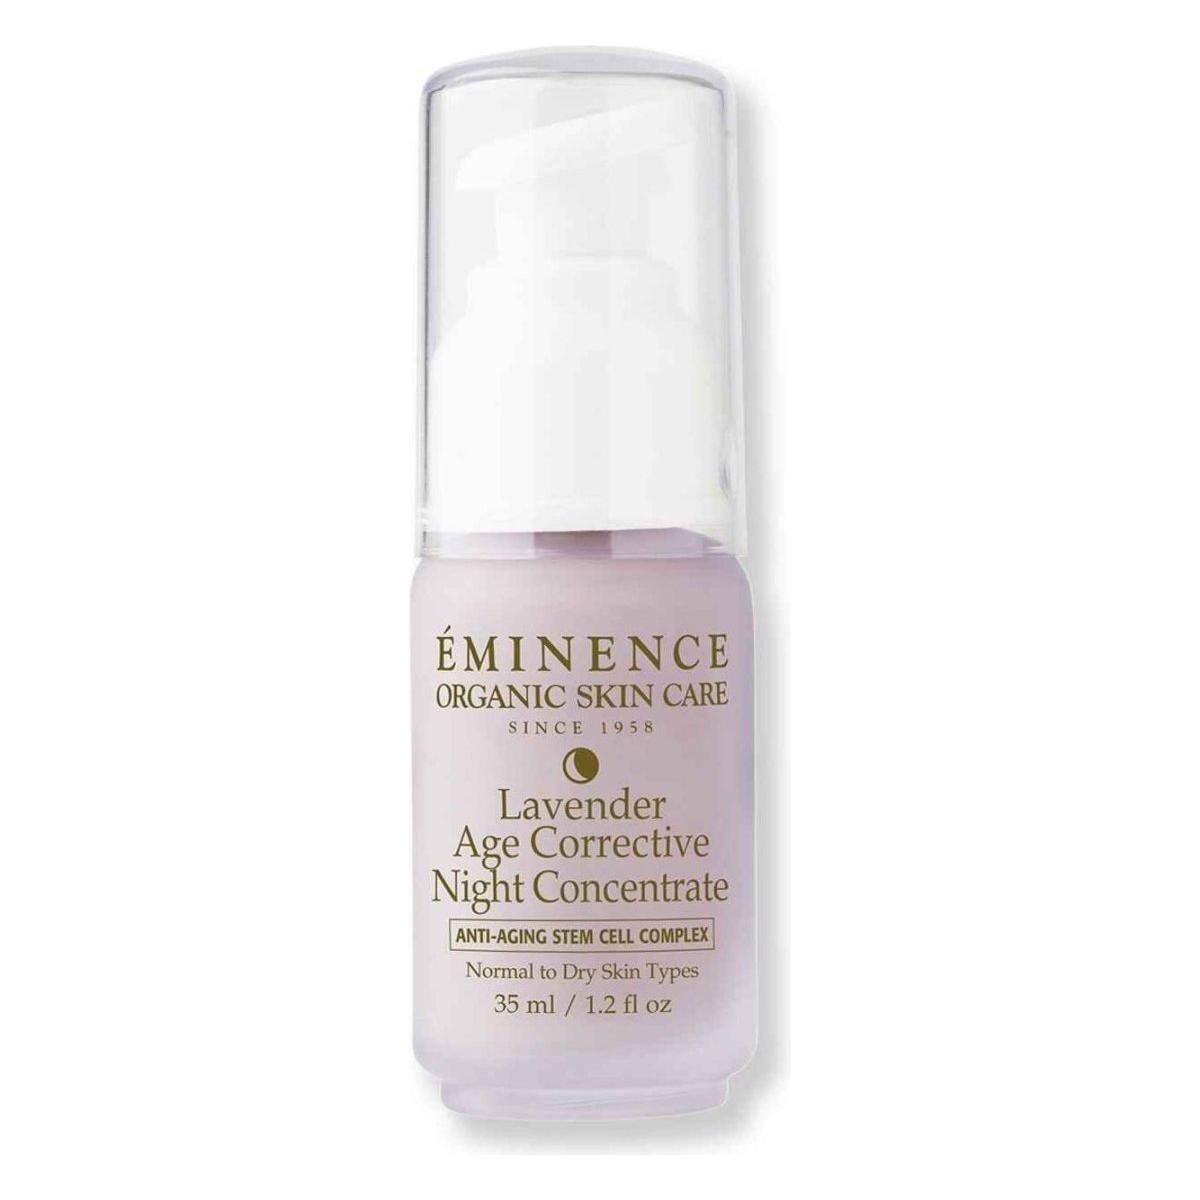 Eminence Lavender Age Corrective Night Concentrate - 35ml - Glam Global UK